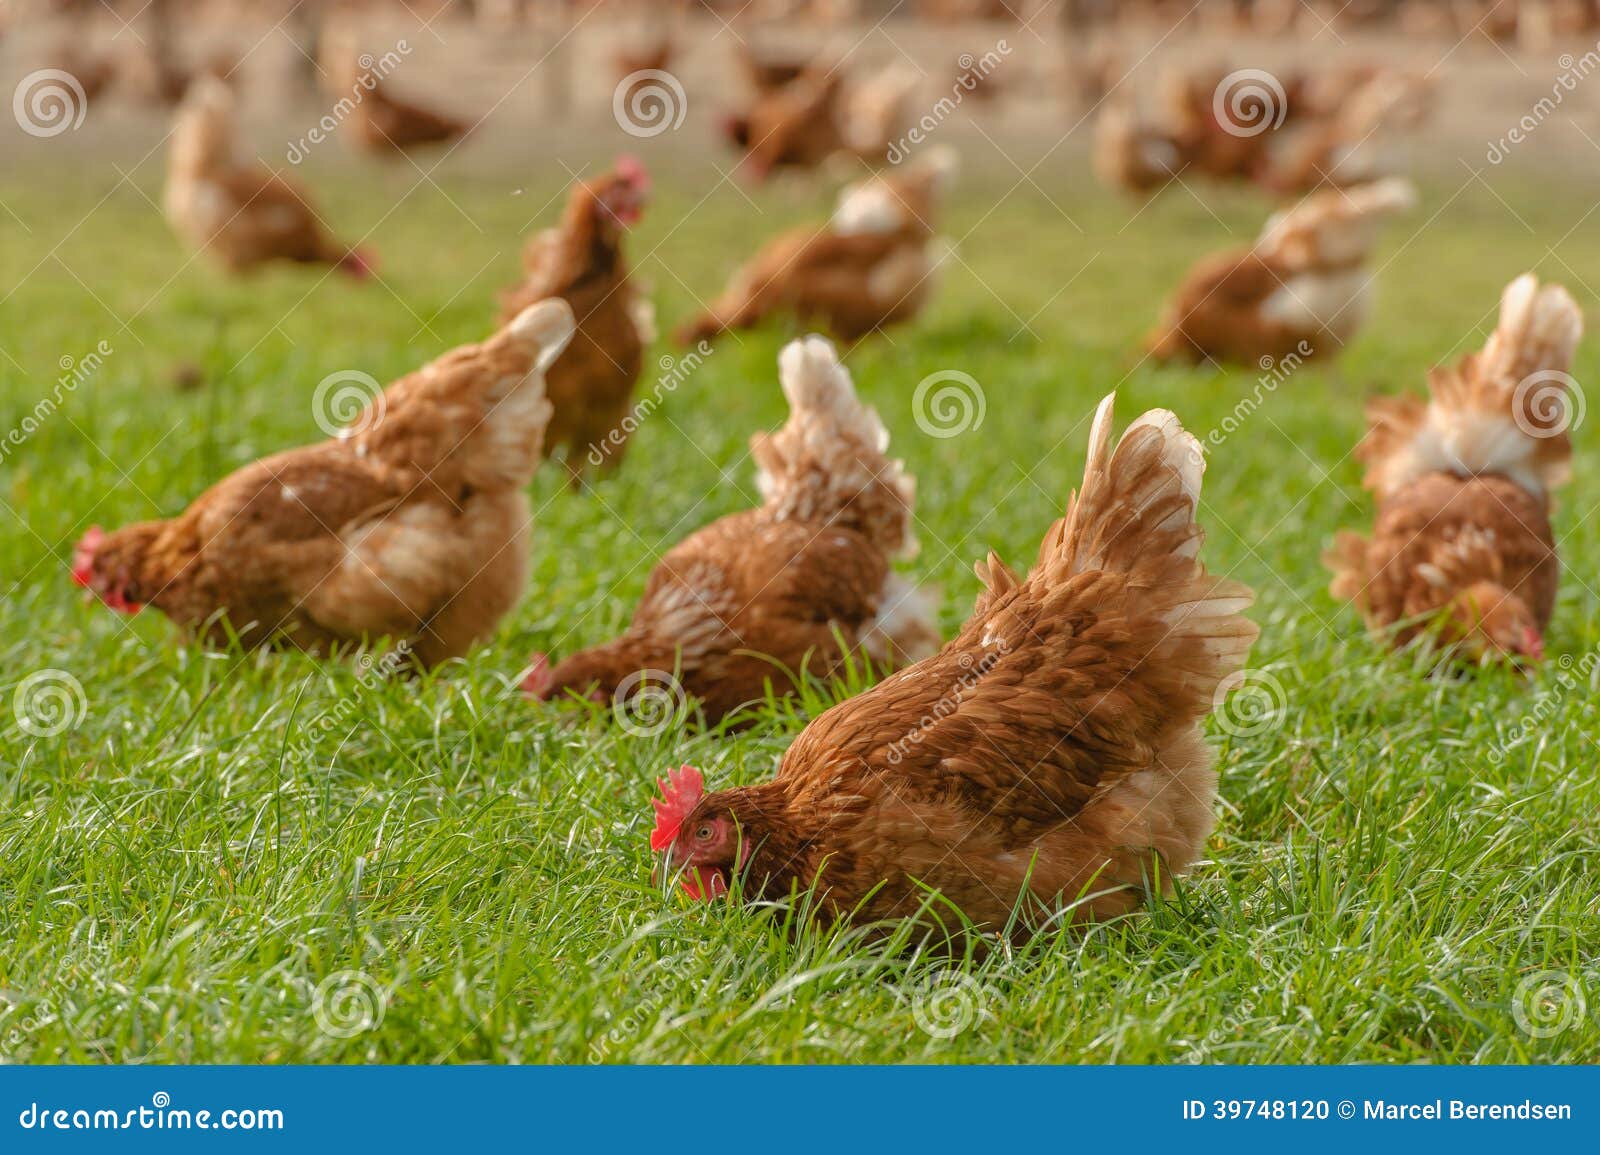 poultry - brown layer hens (free range)